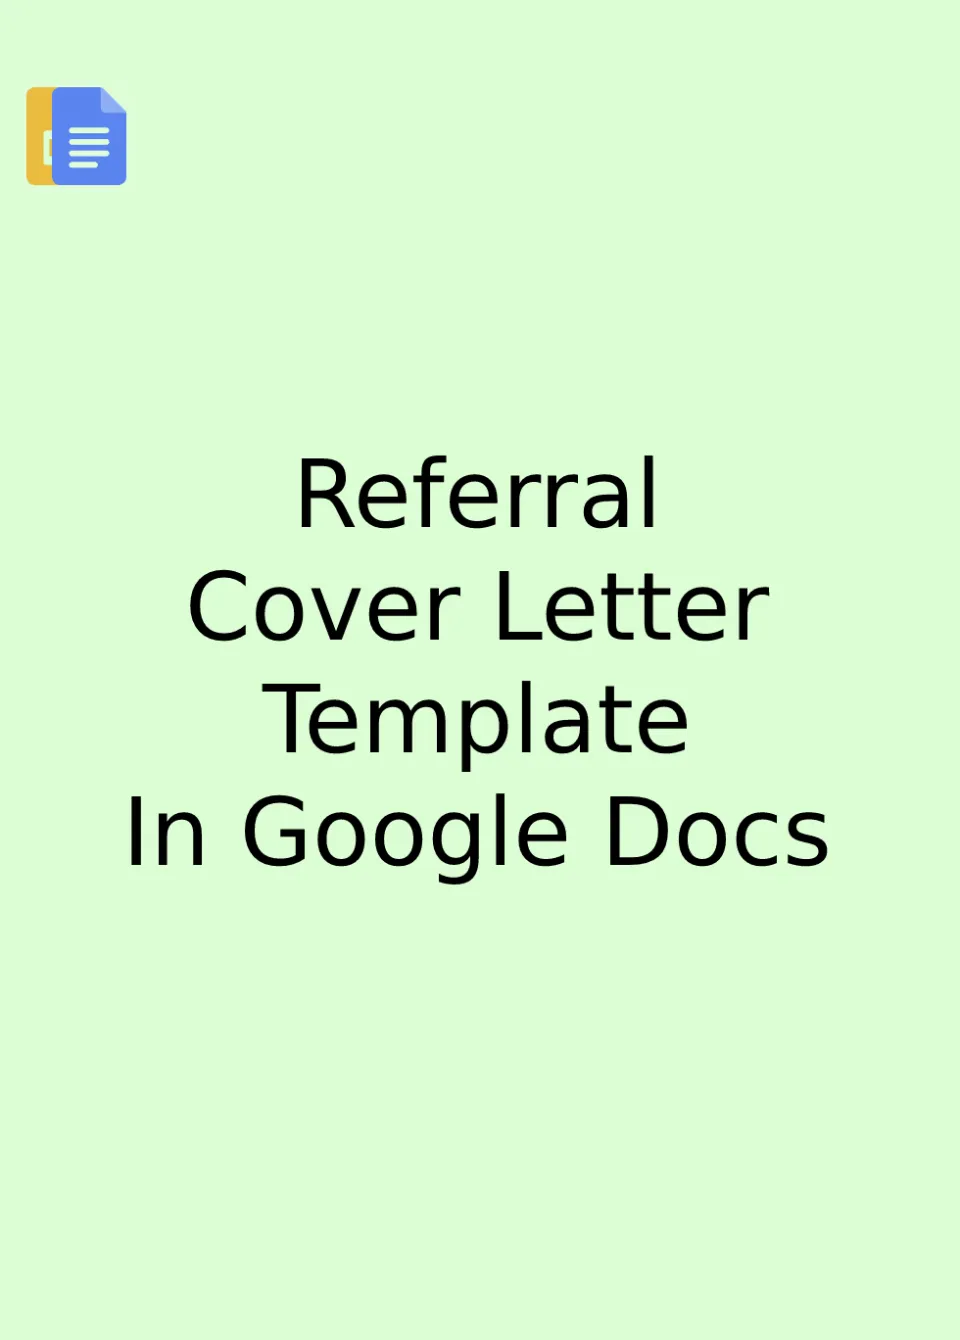 Referral Cover Letter Template Google Docs